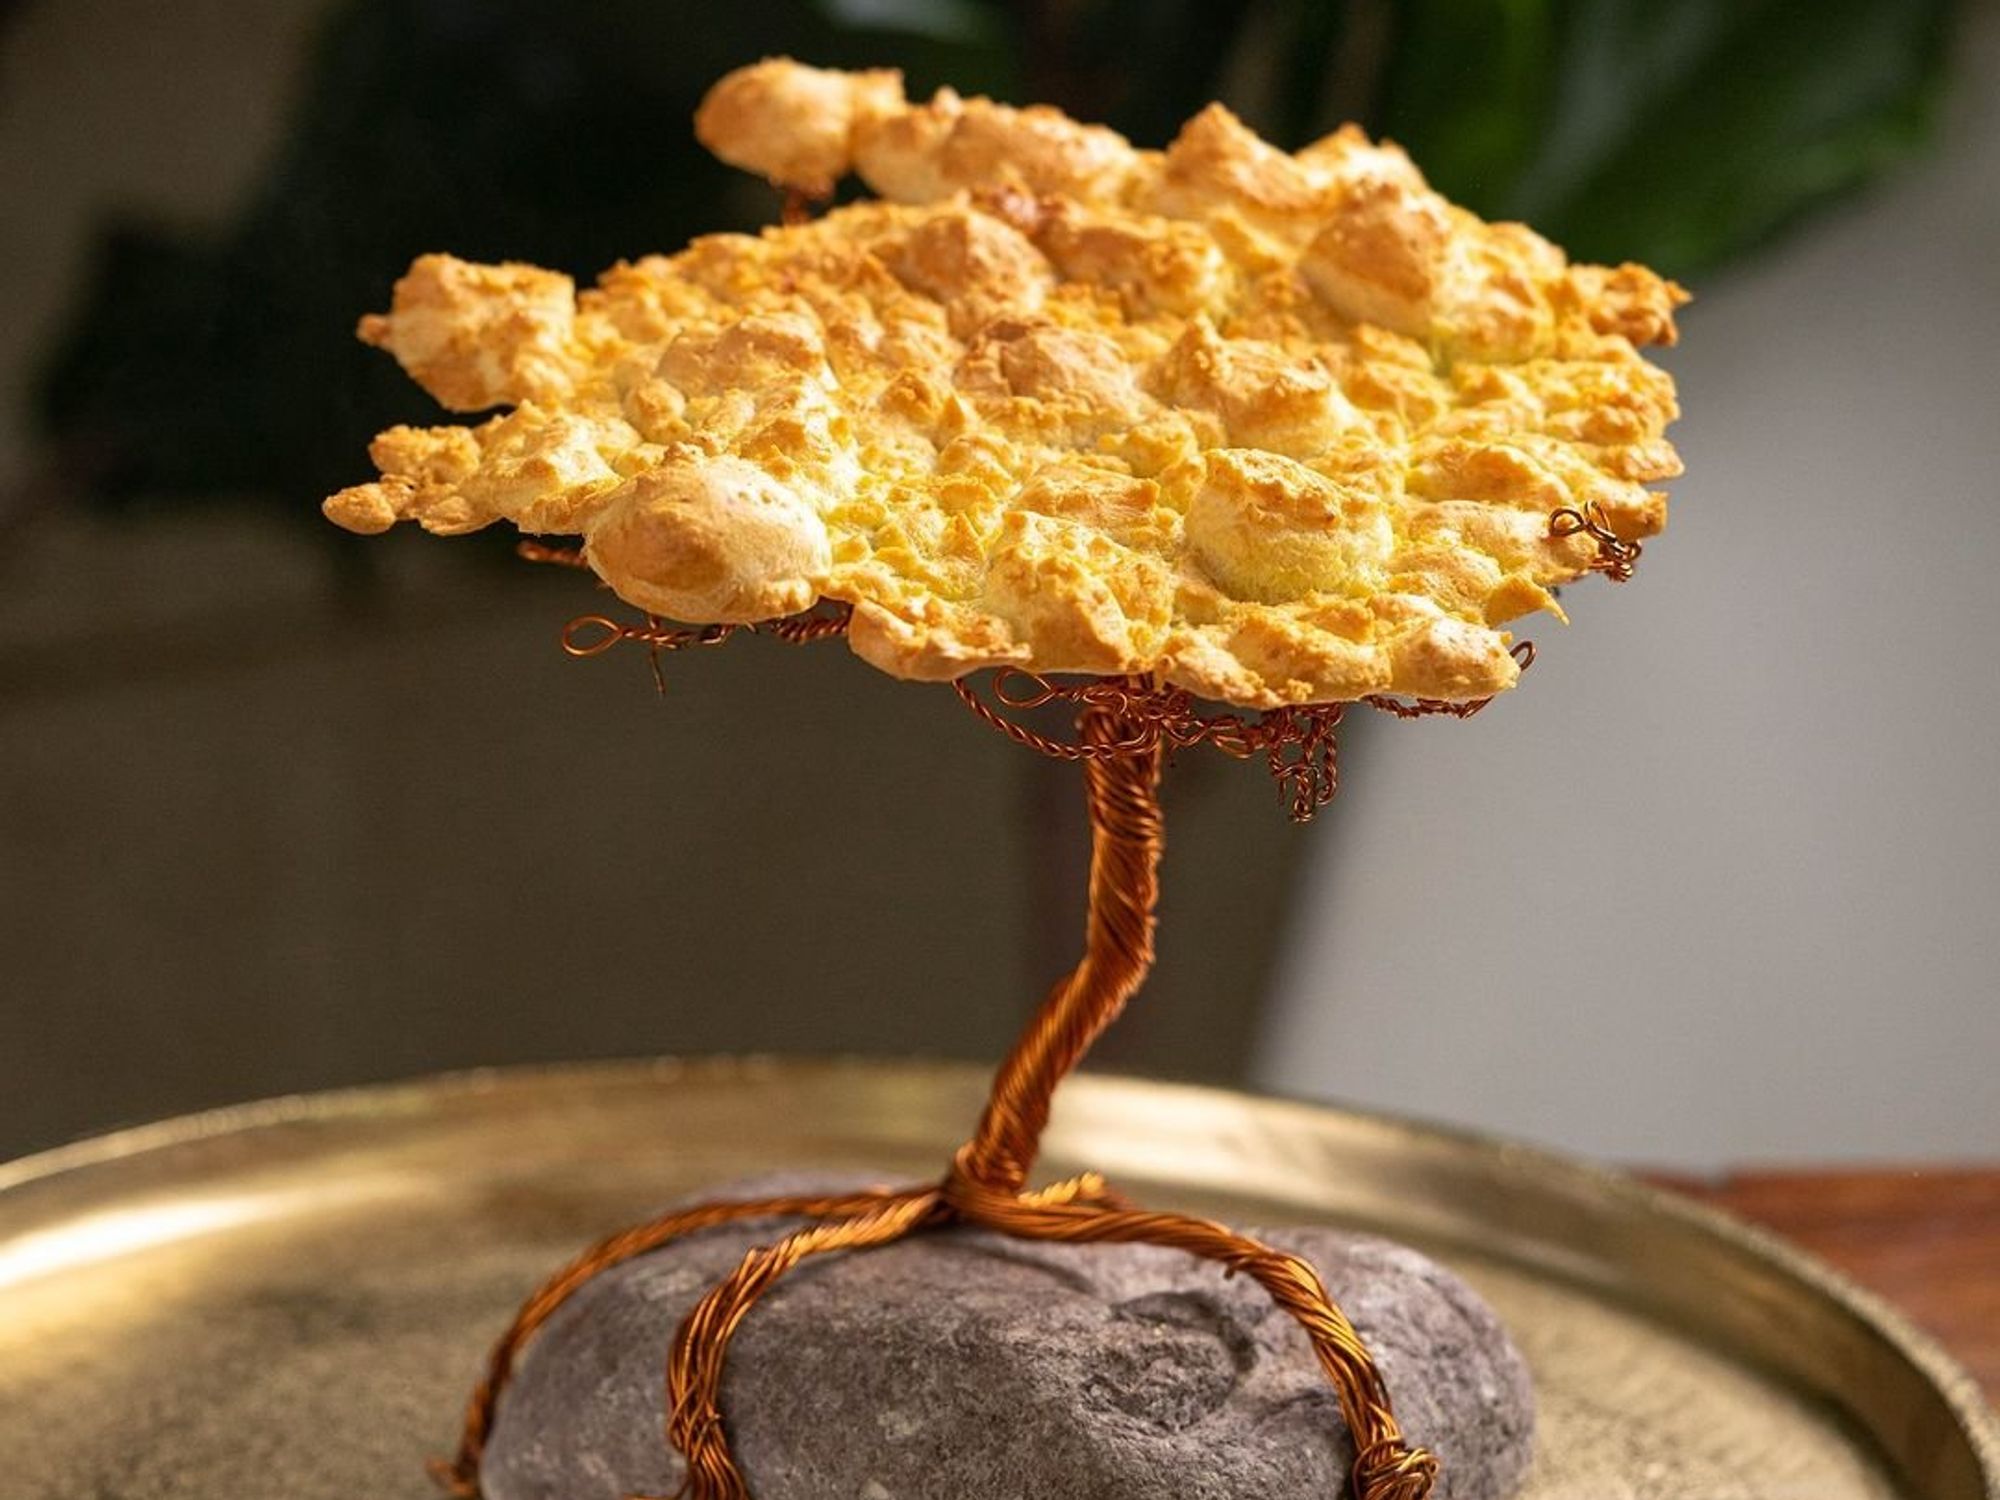 The 'Tree of Life' dish, celebrating the Naked Indian Tree's versatility from the Amazon rainforest, presented within the refined indoor setting of Miami's Latin fine dining establishment, 'Elcielo'.